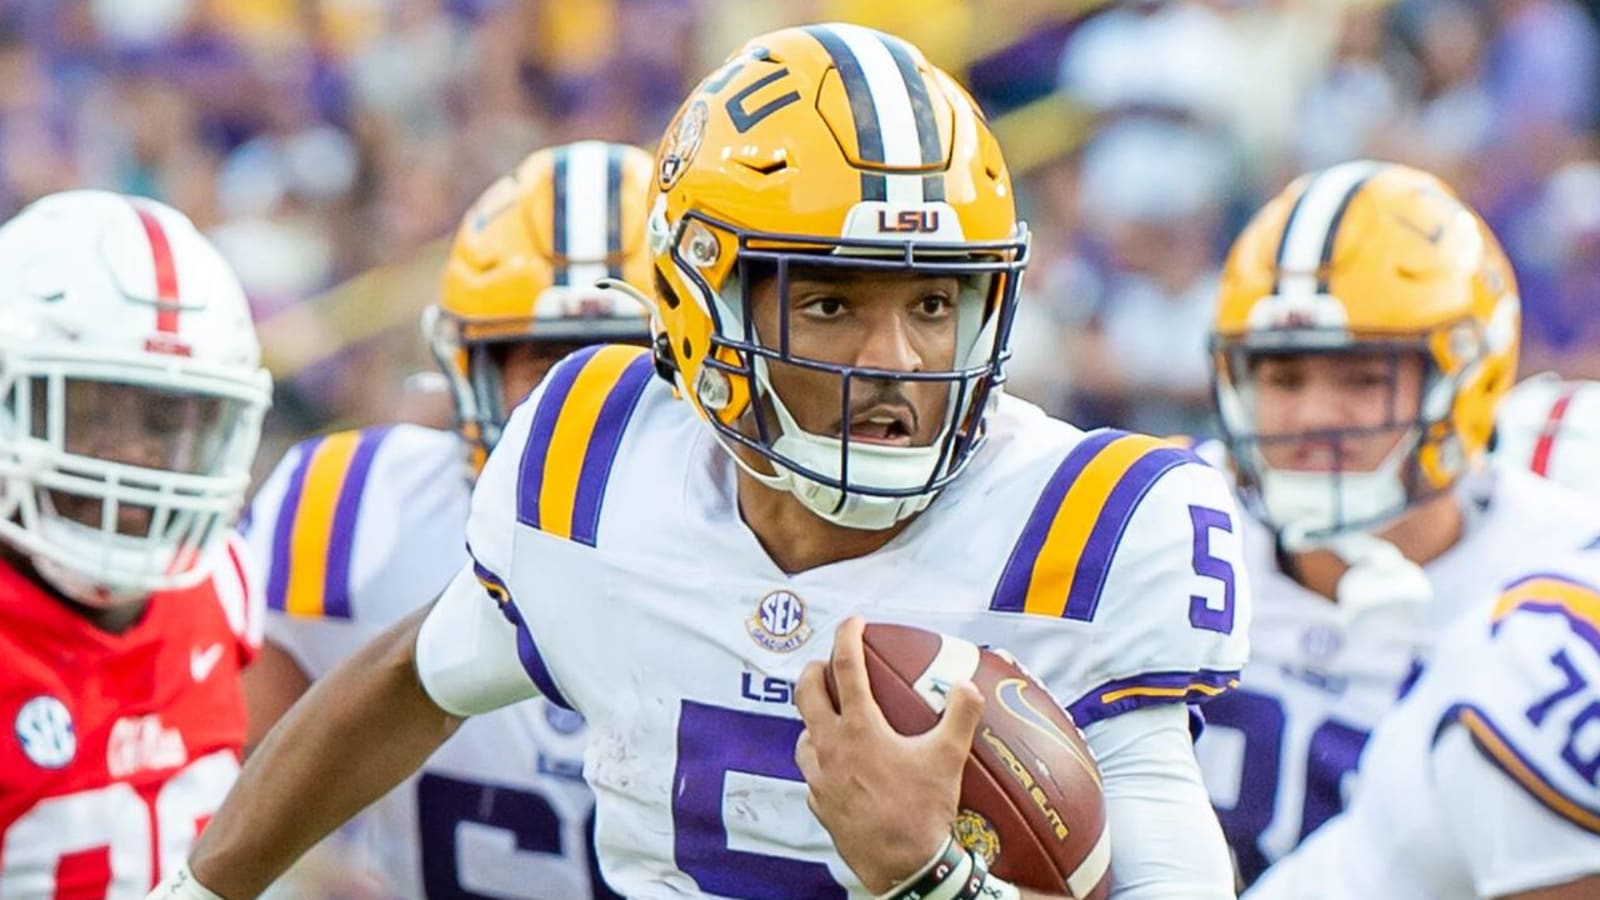 LSU has pieces to pull off huge upset against No. 6 Alabama